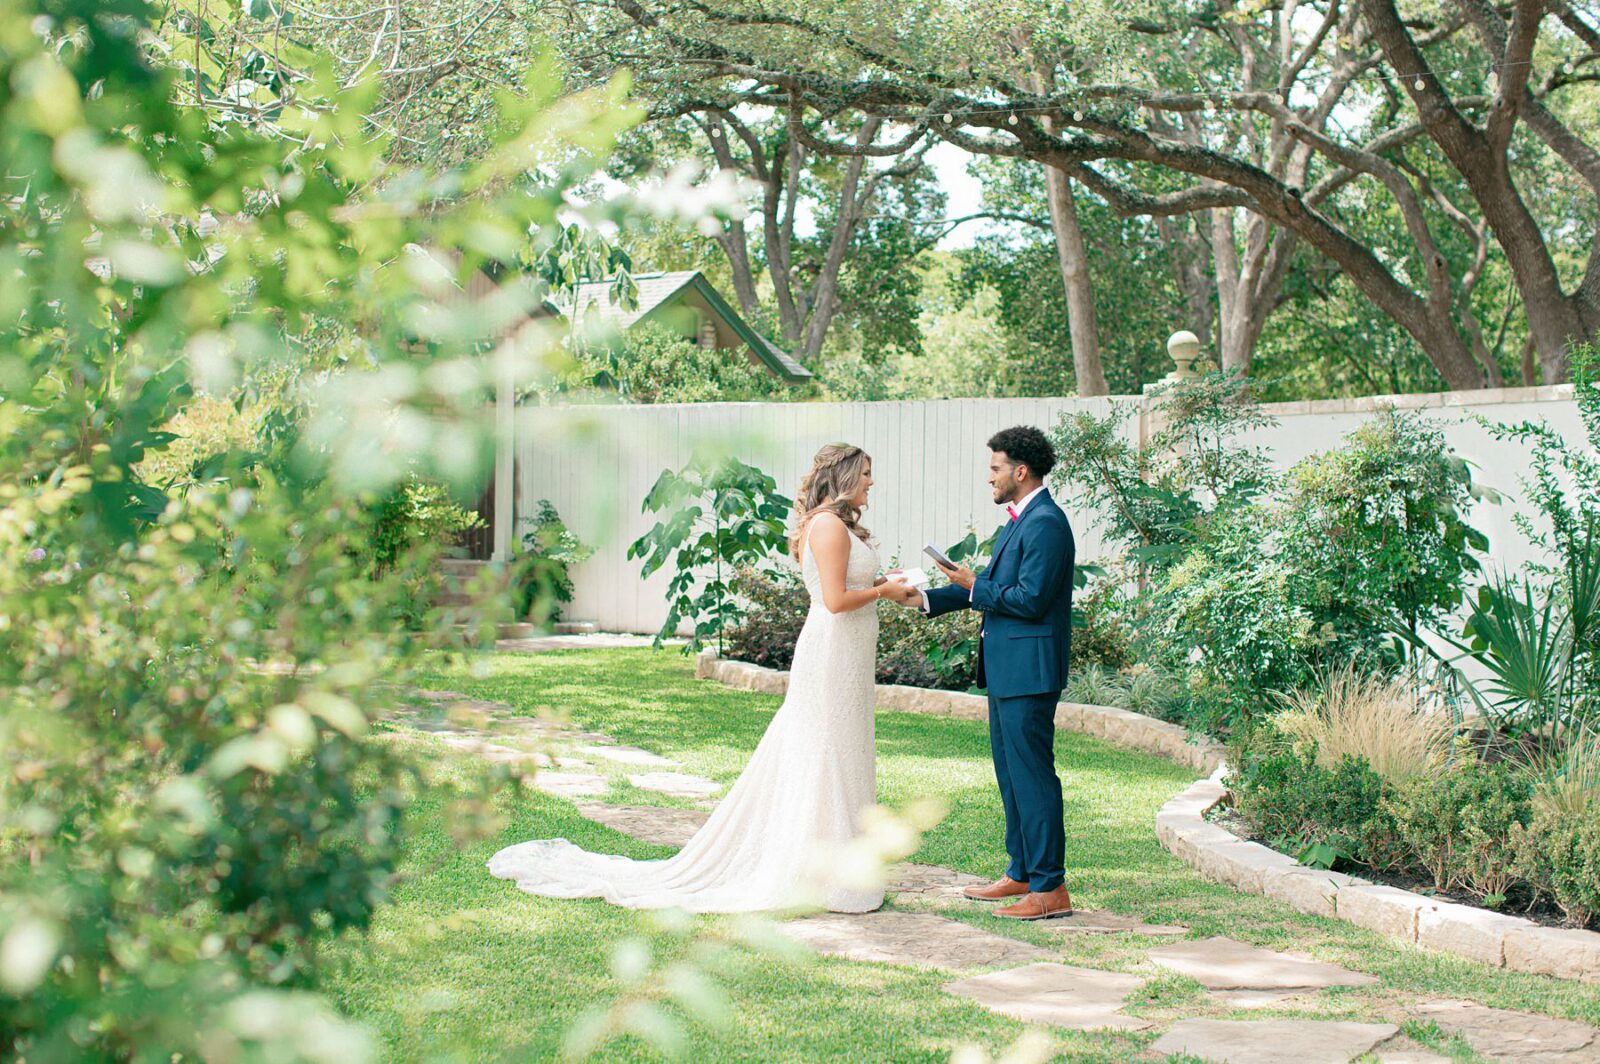 bride and groom reading vows privately during first look at austin garden wedding venue